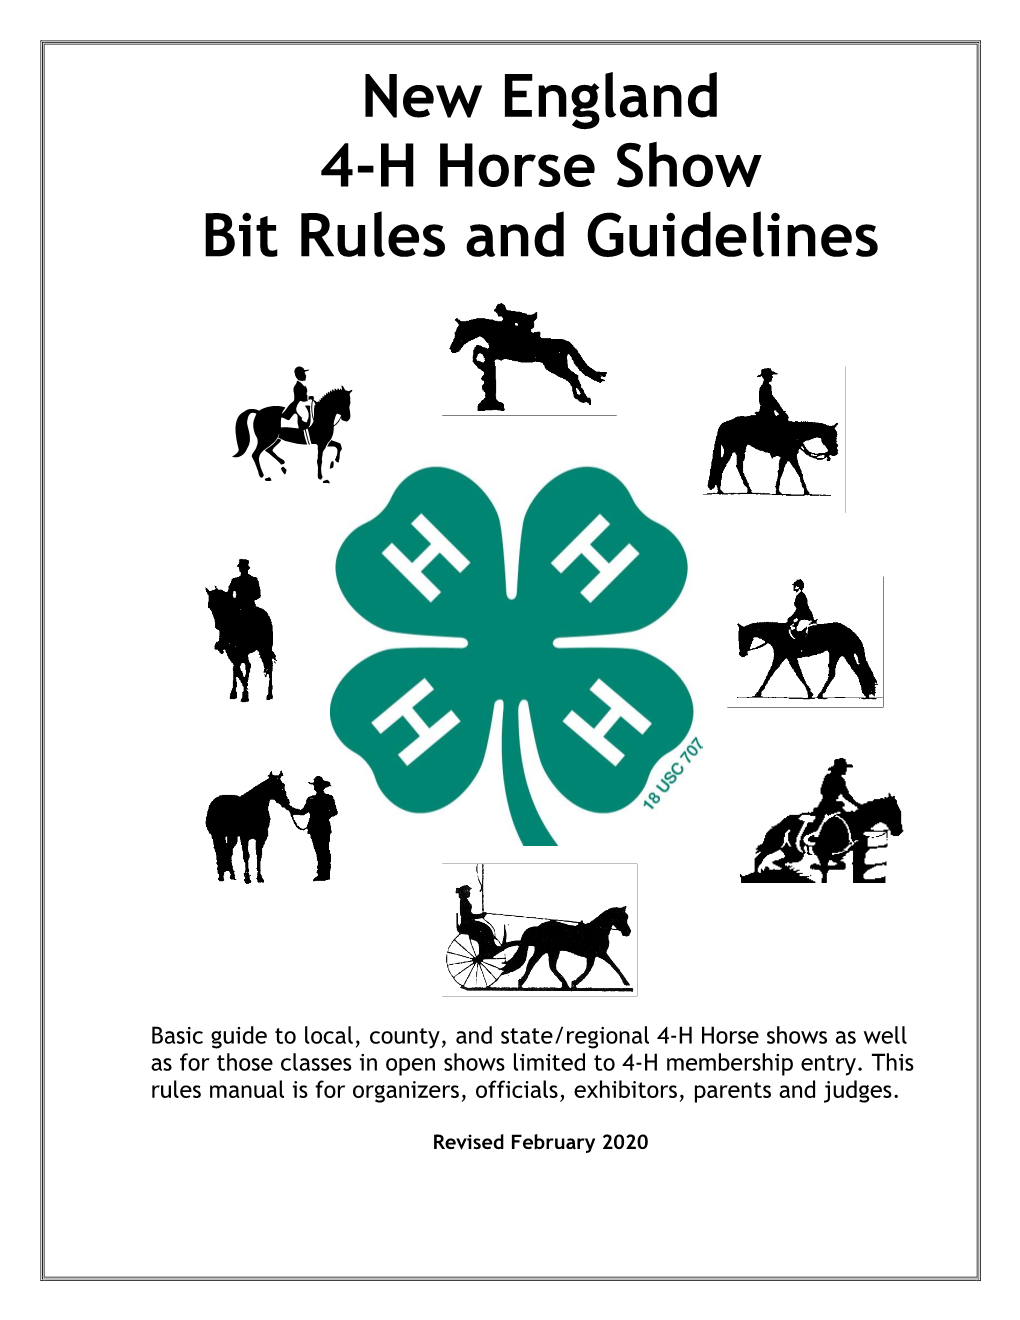 New England 4-H Horse Show Bit Rules and Guidelines